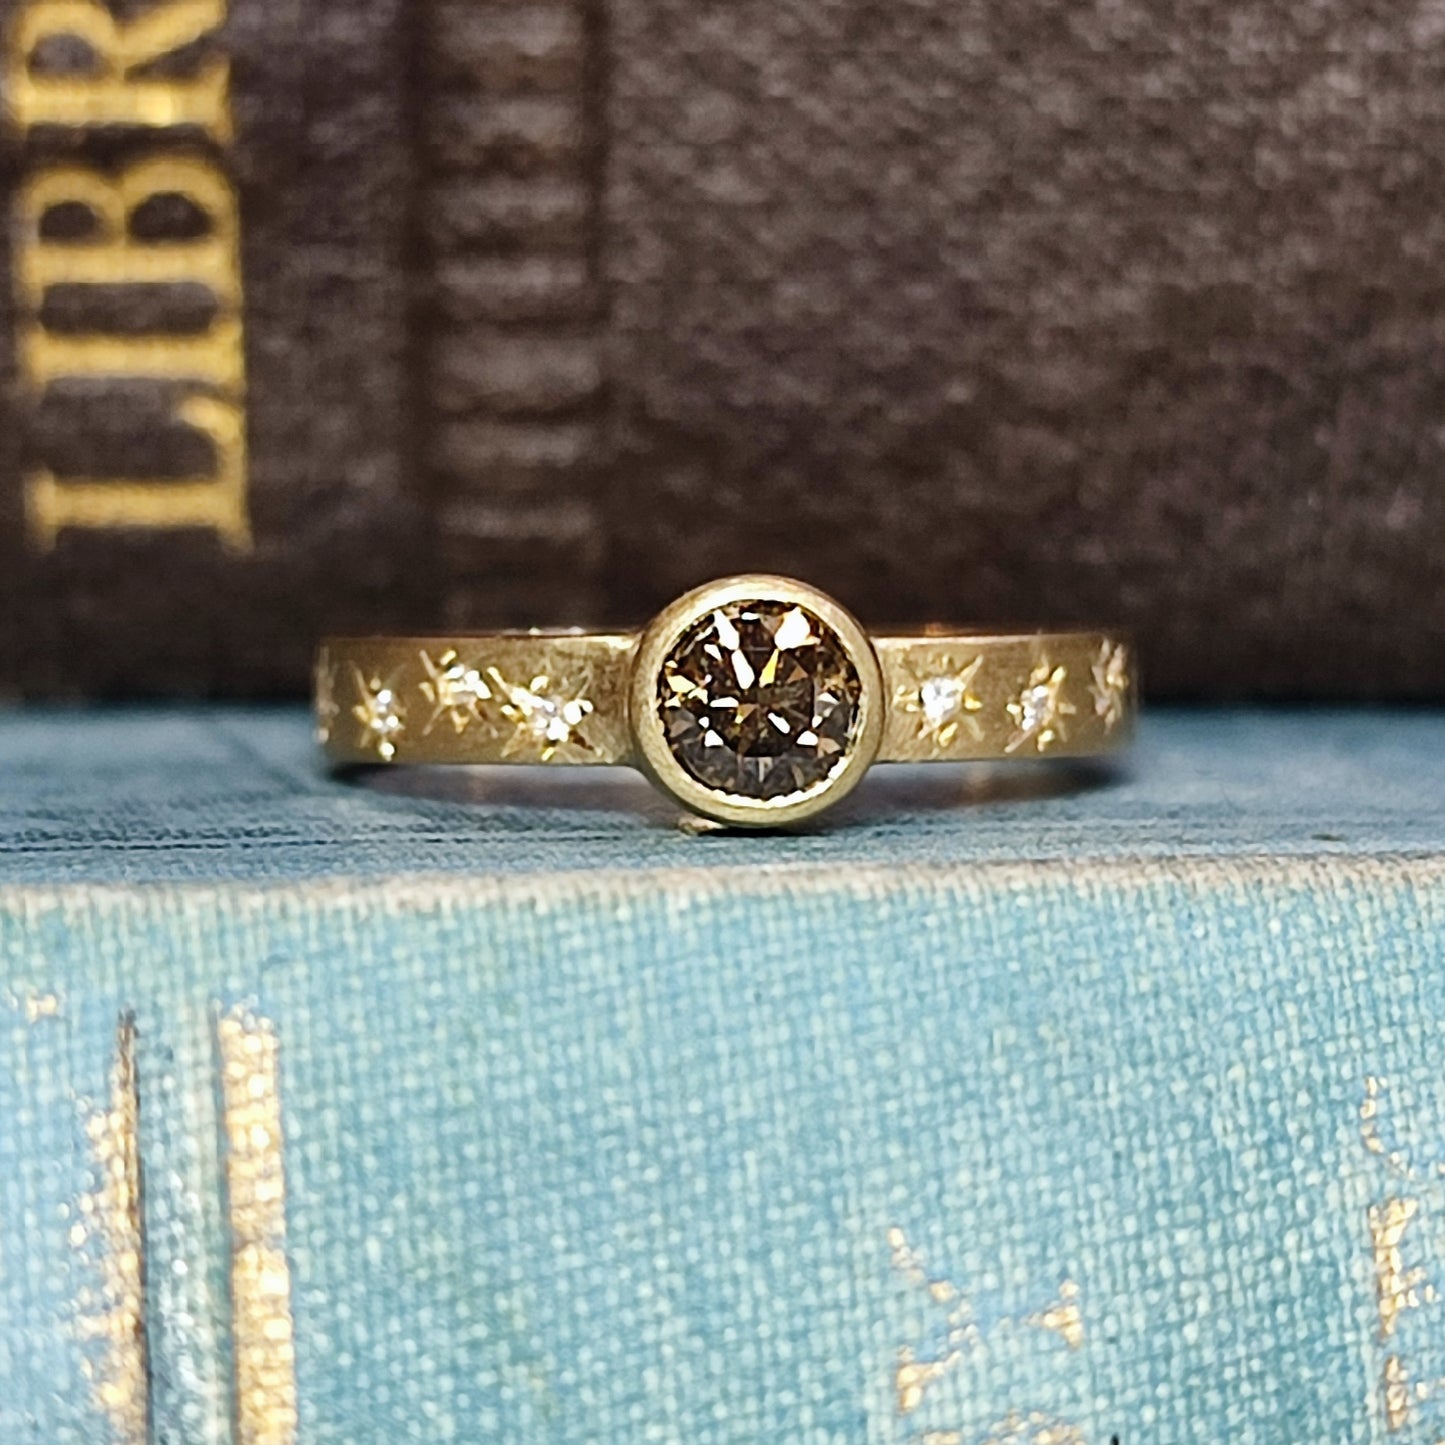 18ct Yellow Gold Rubover Engagement Ring with 0.39ct Fancy Dark Brown Diamond and Star Set Shoulders